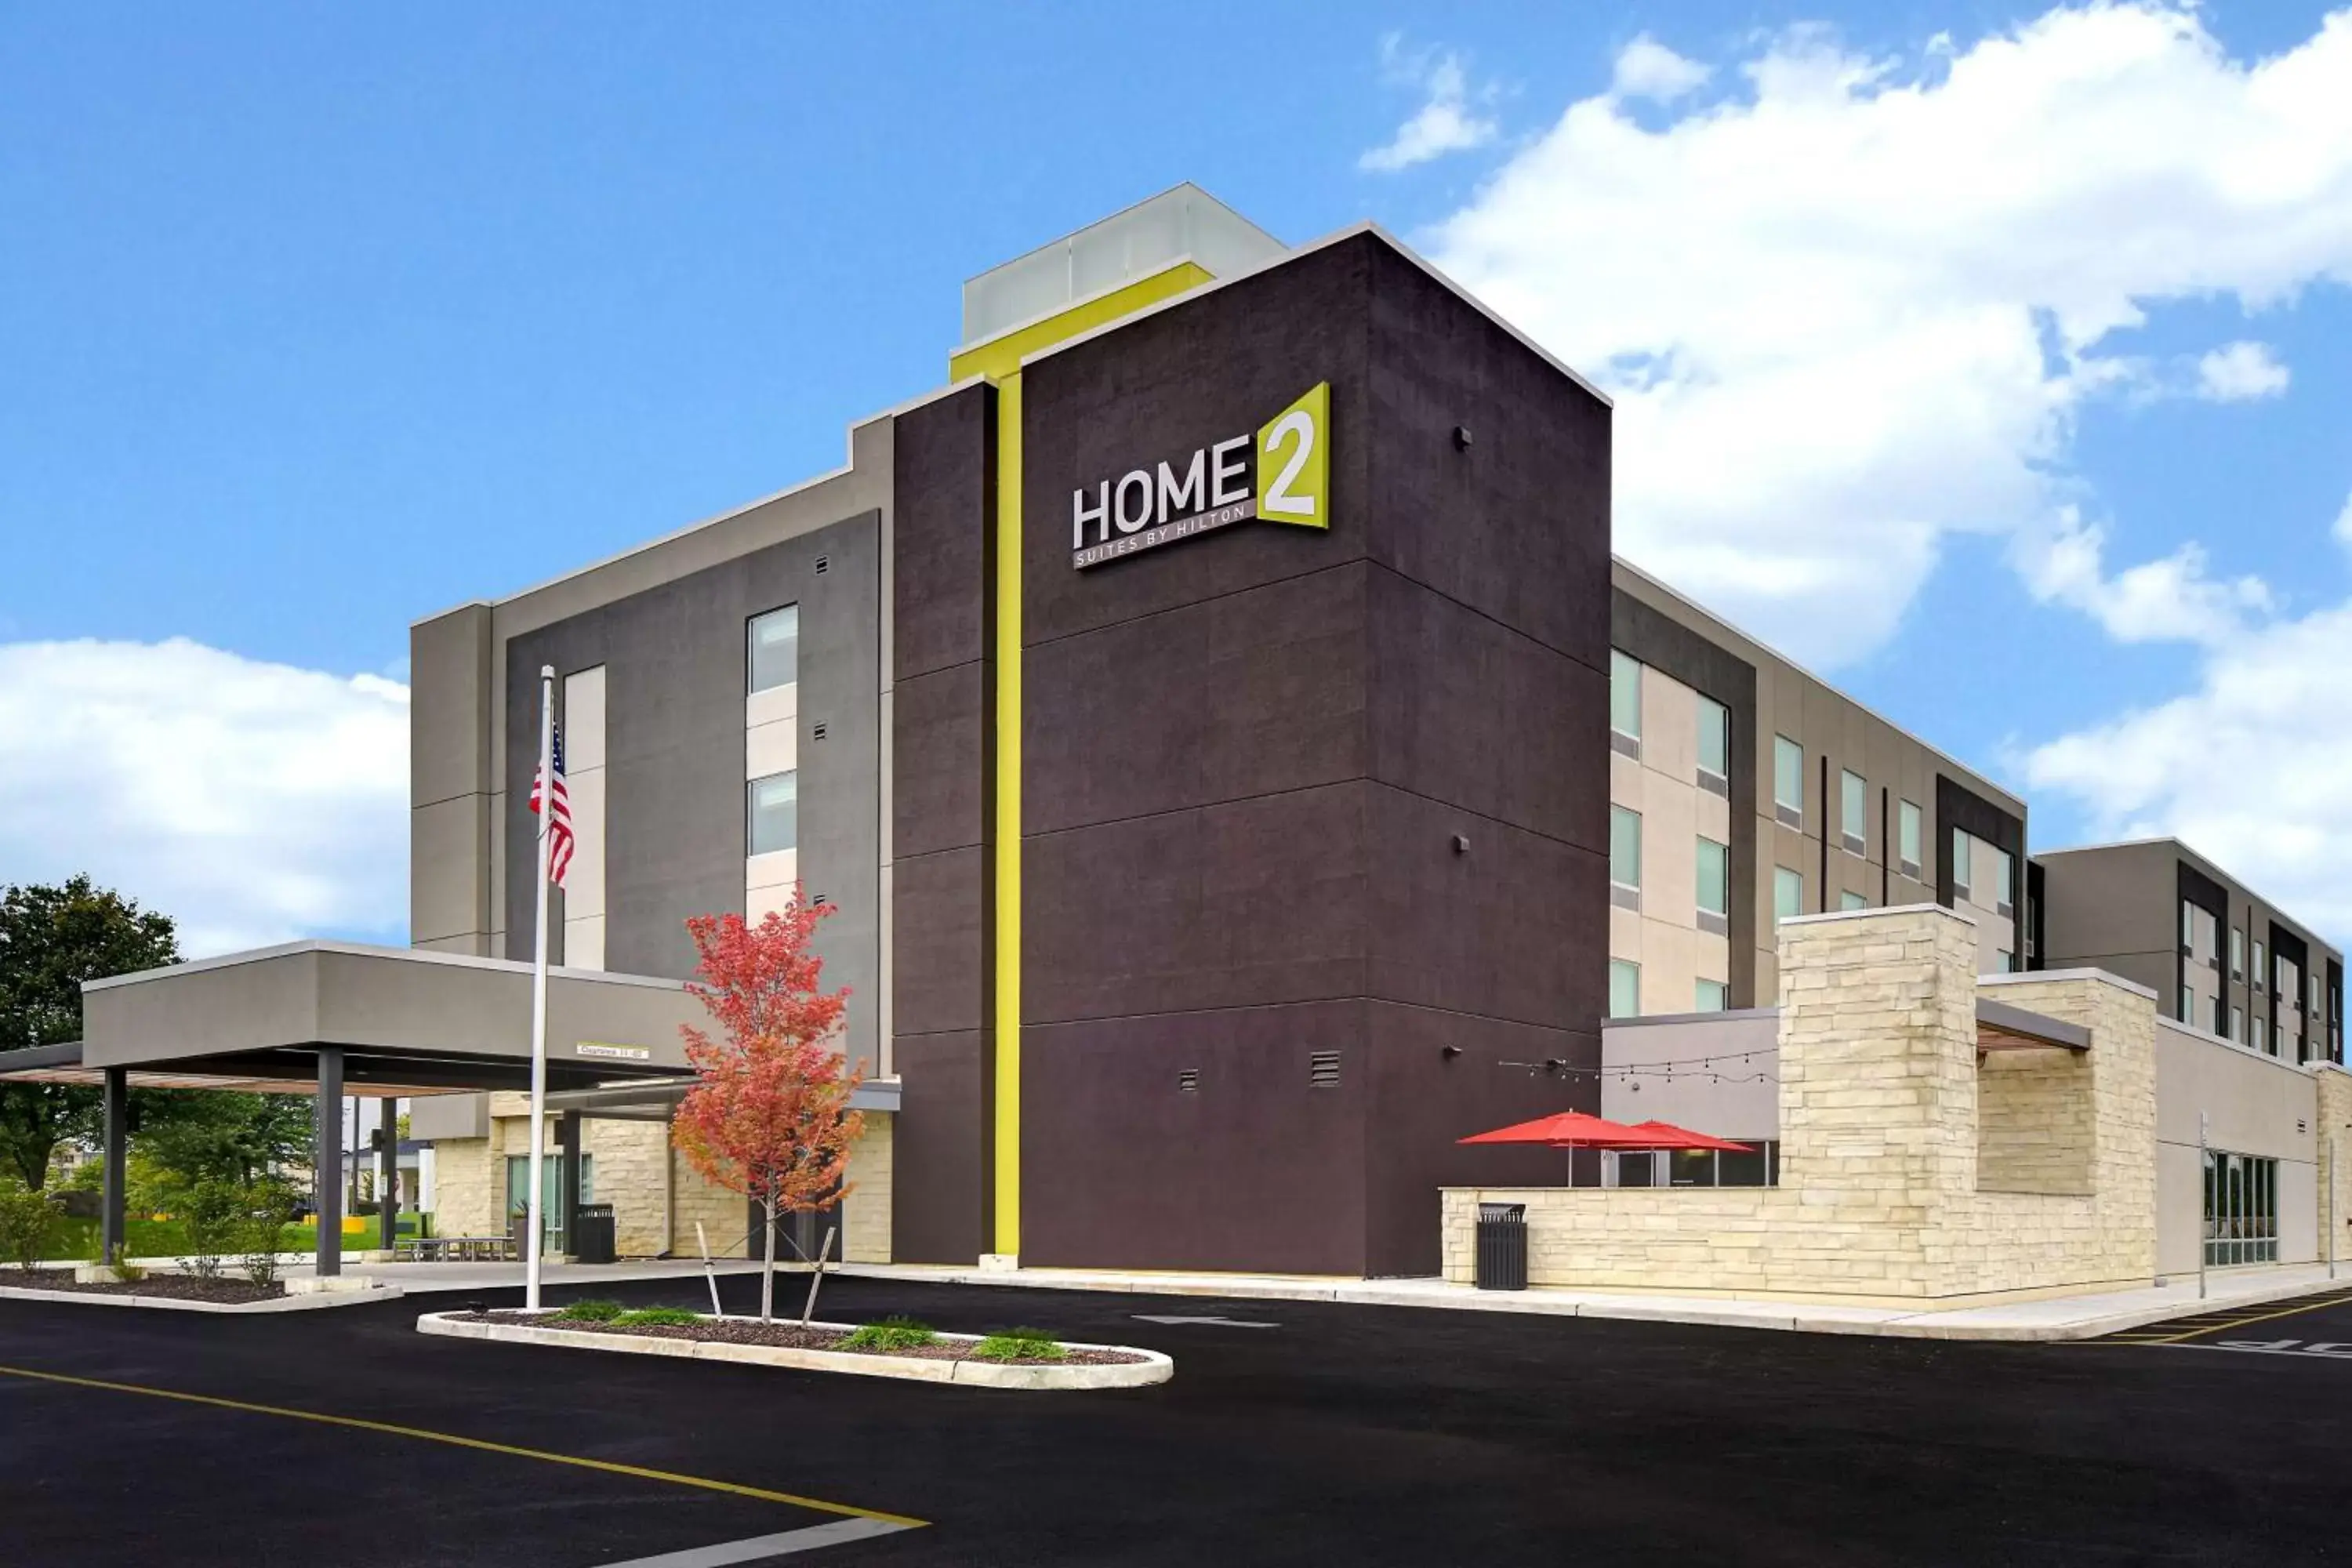 Property Building in Home2 Suites East Hanover, NJ